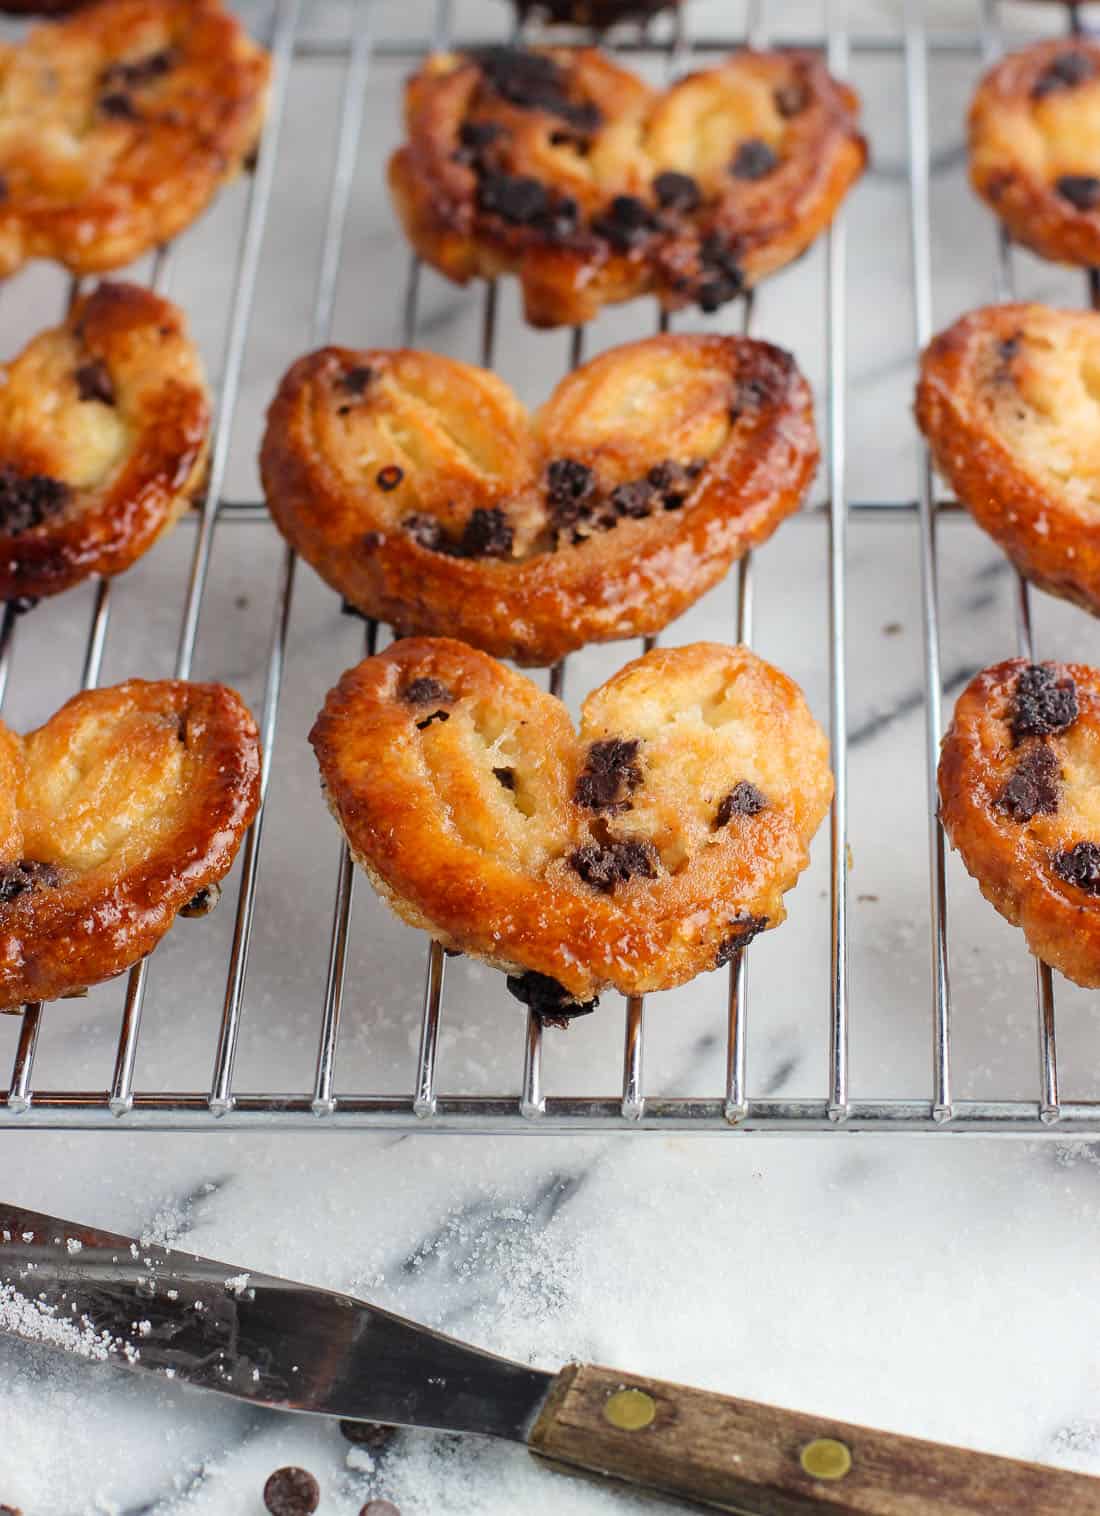 Baked palmiers on a metal wire rack